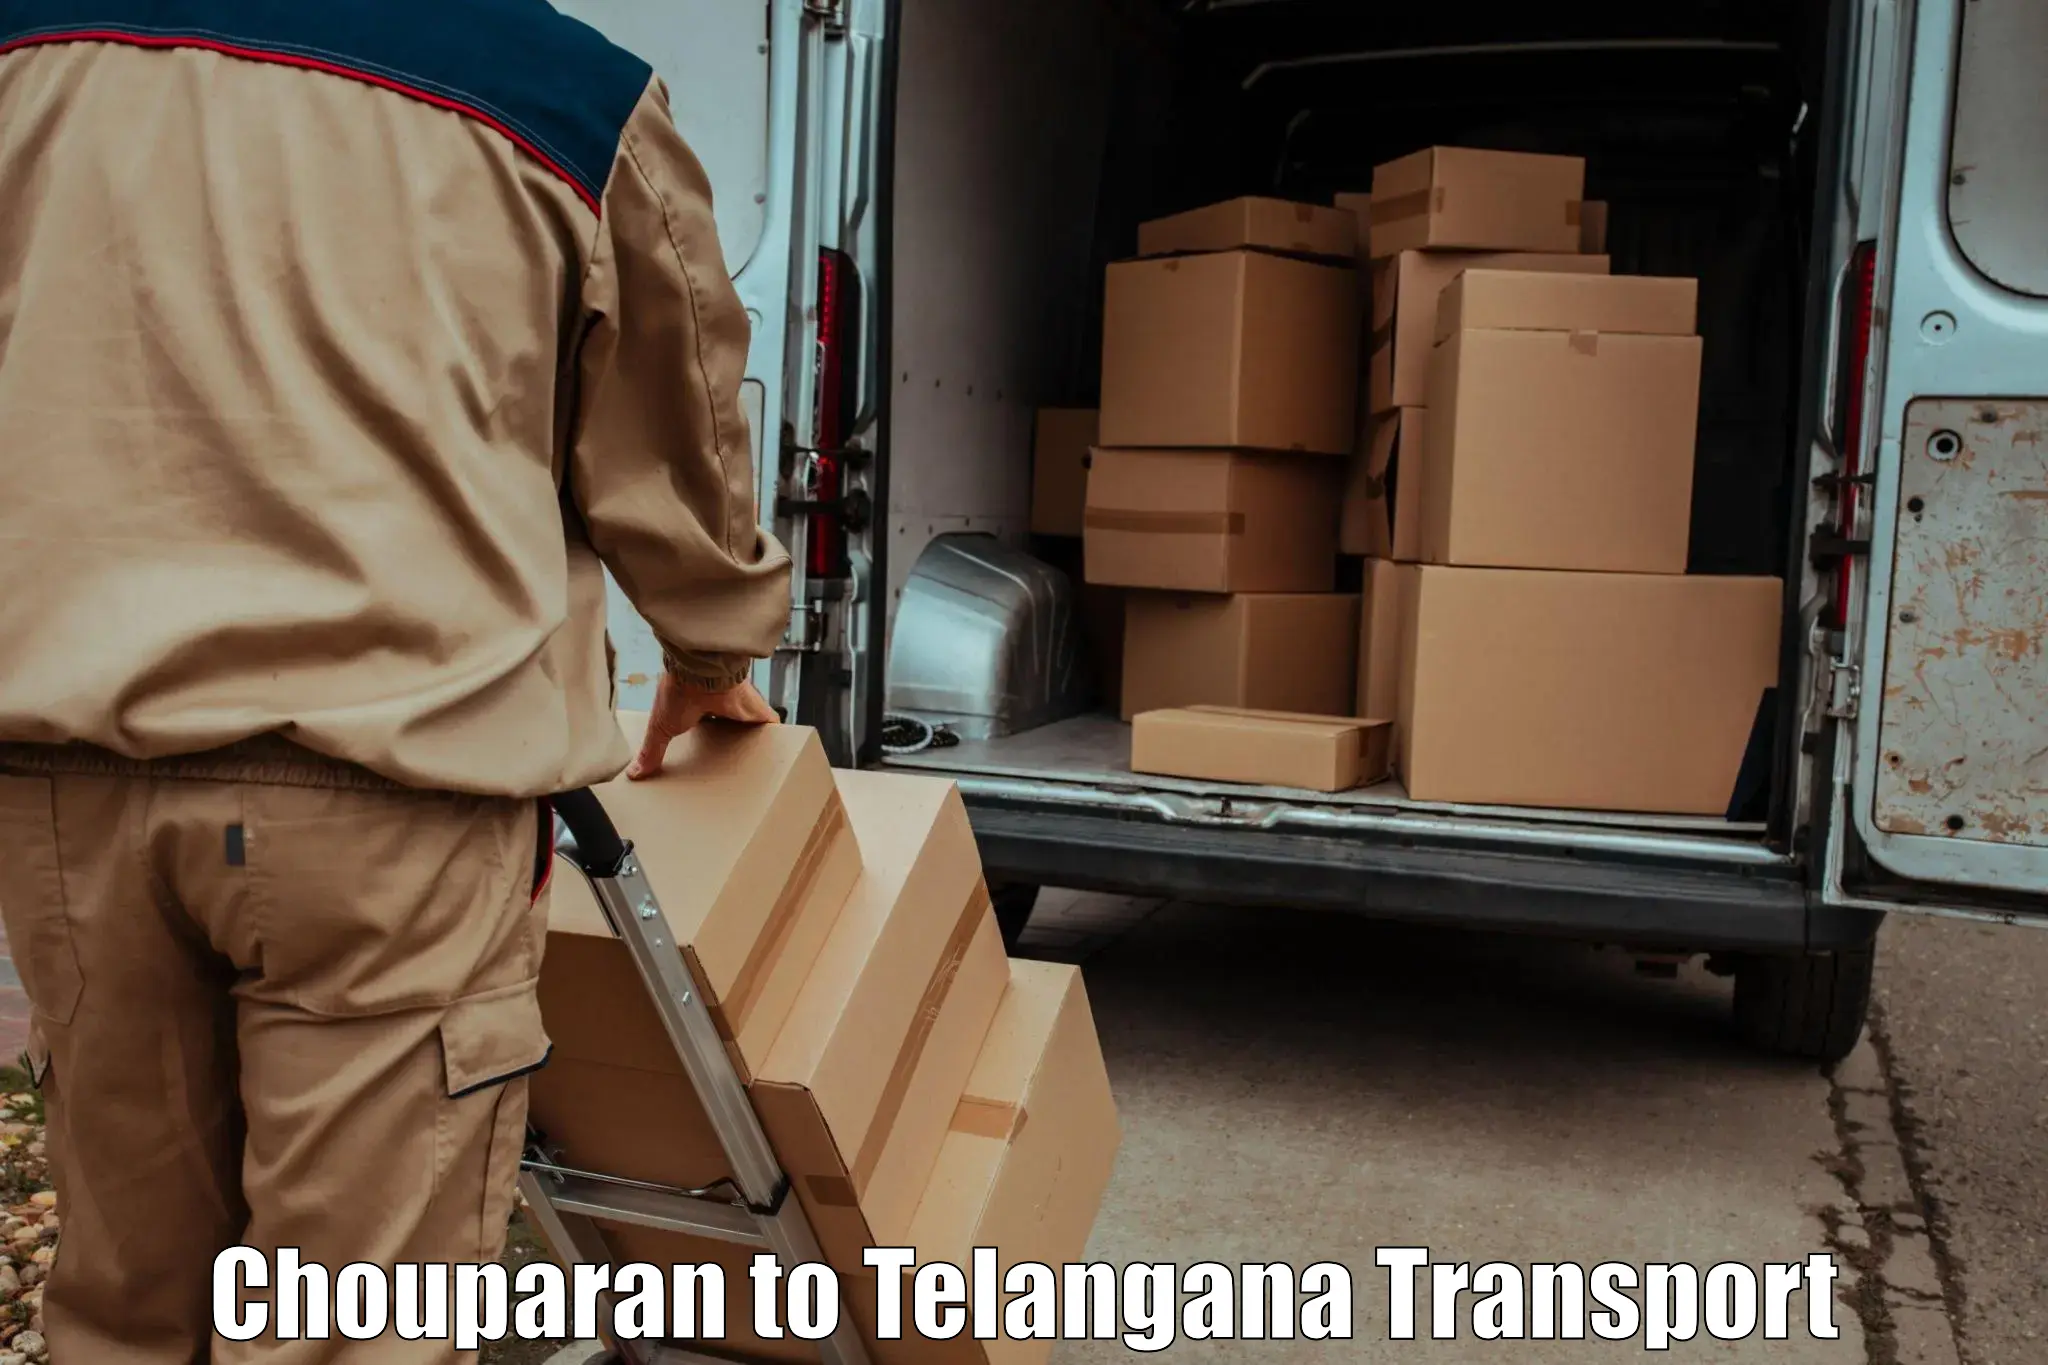 Two wheeler parcel service in Chouparan to Hyderabad